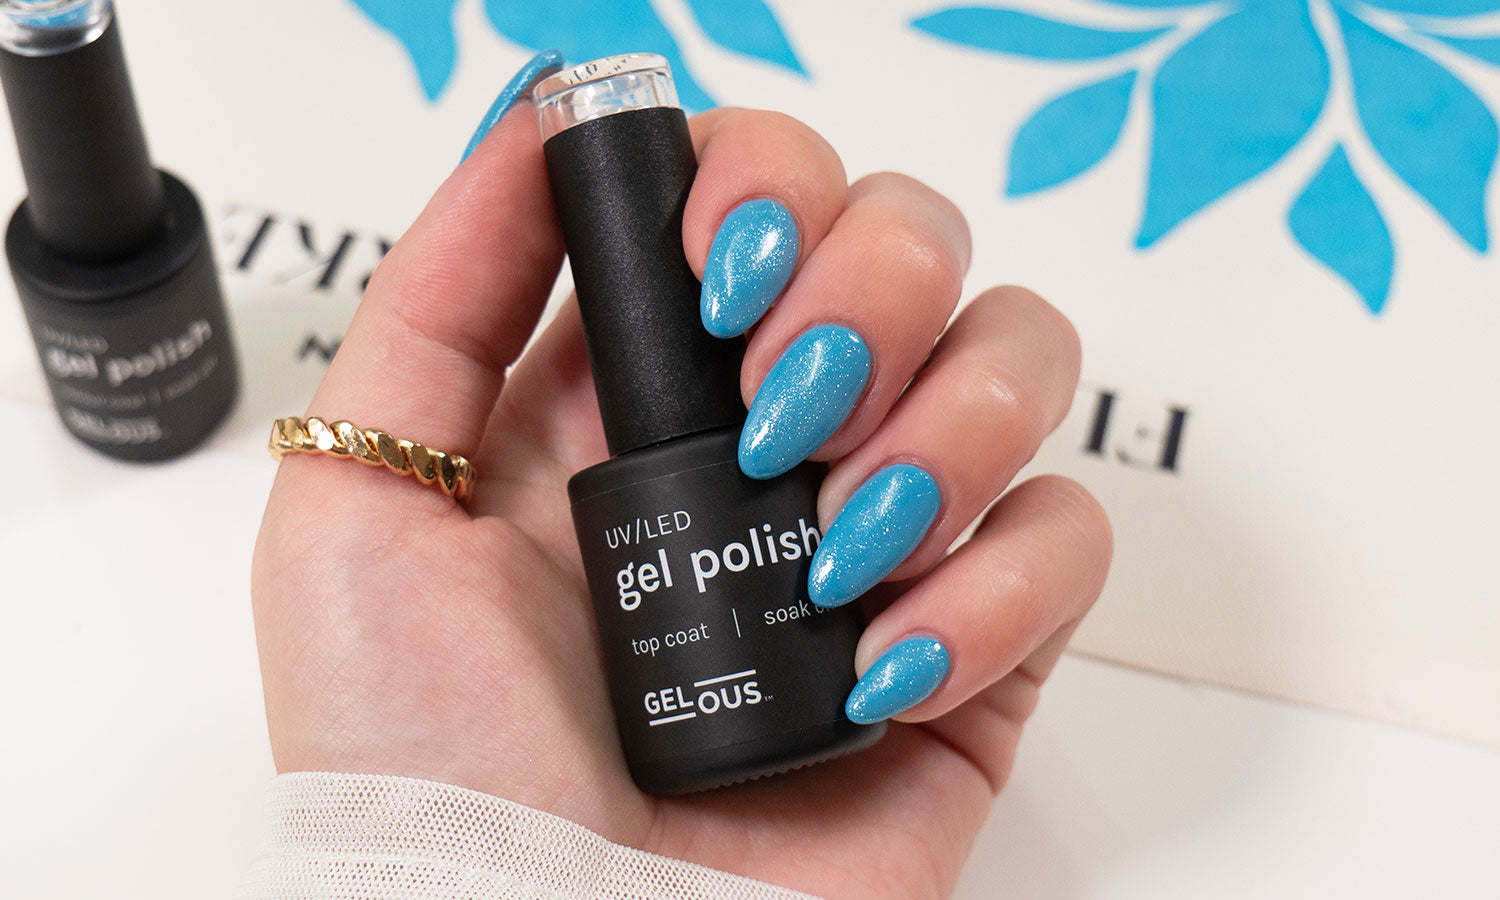 Gelous Shimmer Top Coat Gel Nail Polish - photographed in New Zealand on model